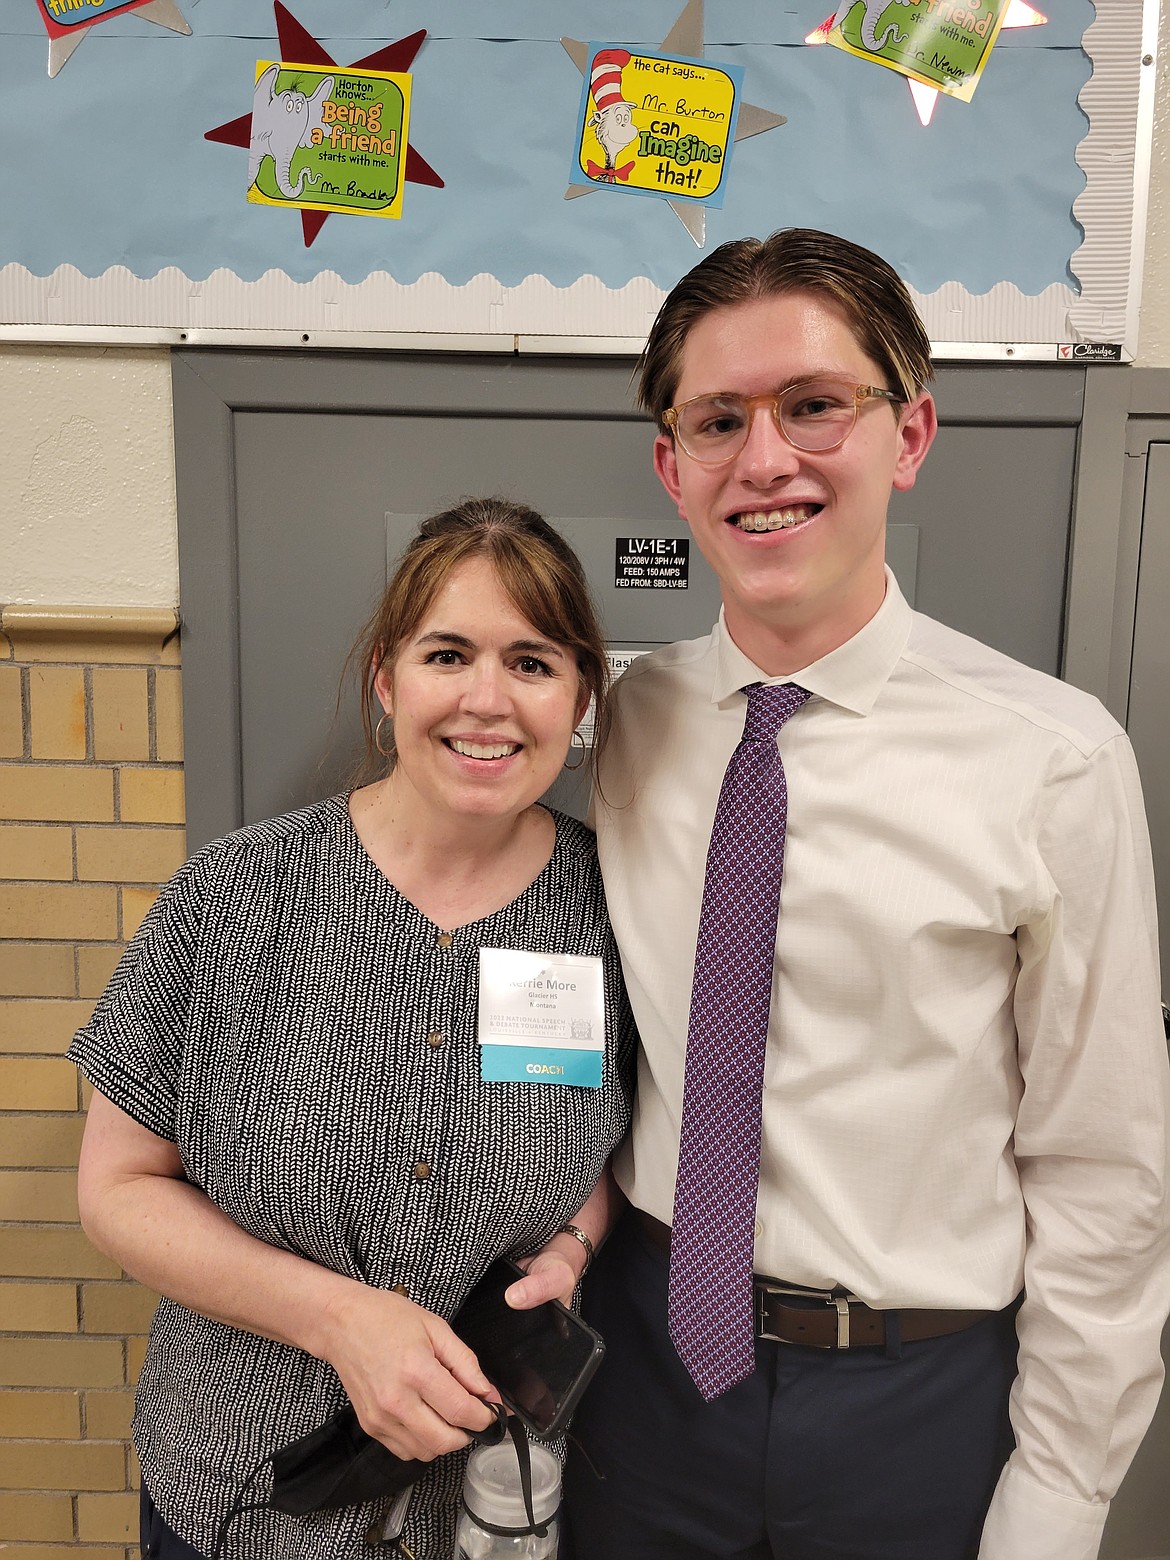 Lane McKoy, right, placed 12th in Informative Speaking at the National Speech and Debate Tournament. Glacier Informative Speaking coach Kerrie More is pictured. (Photo provided by Greg Adkins)